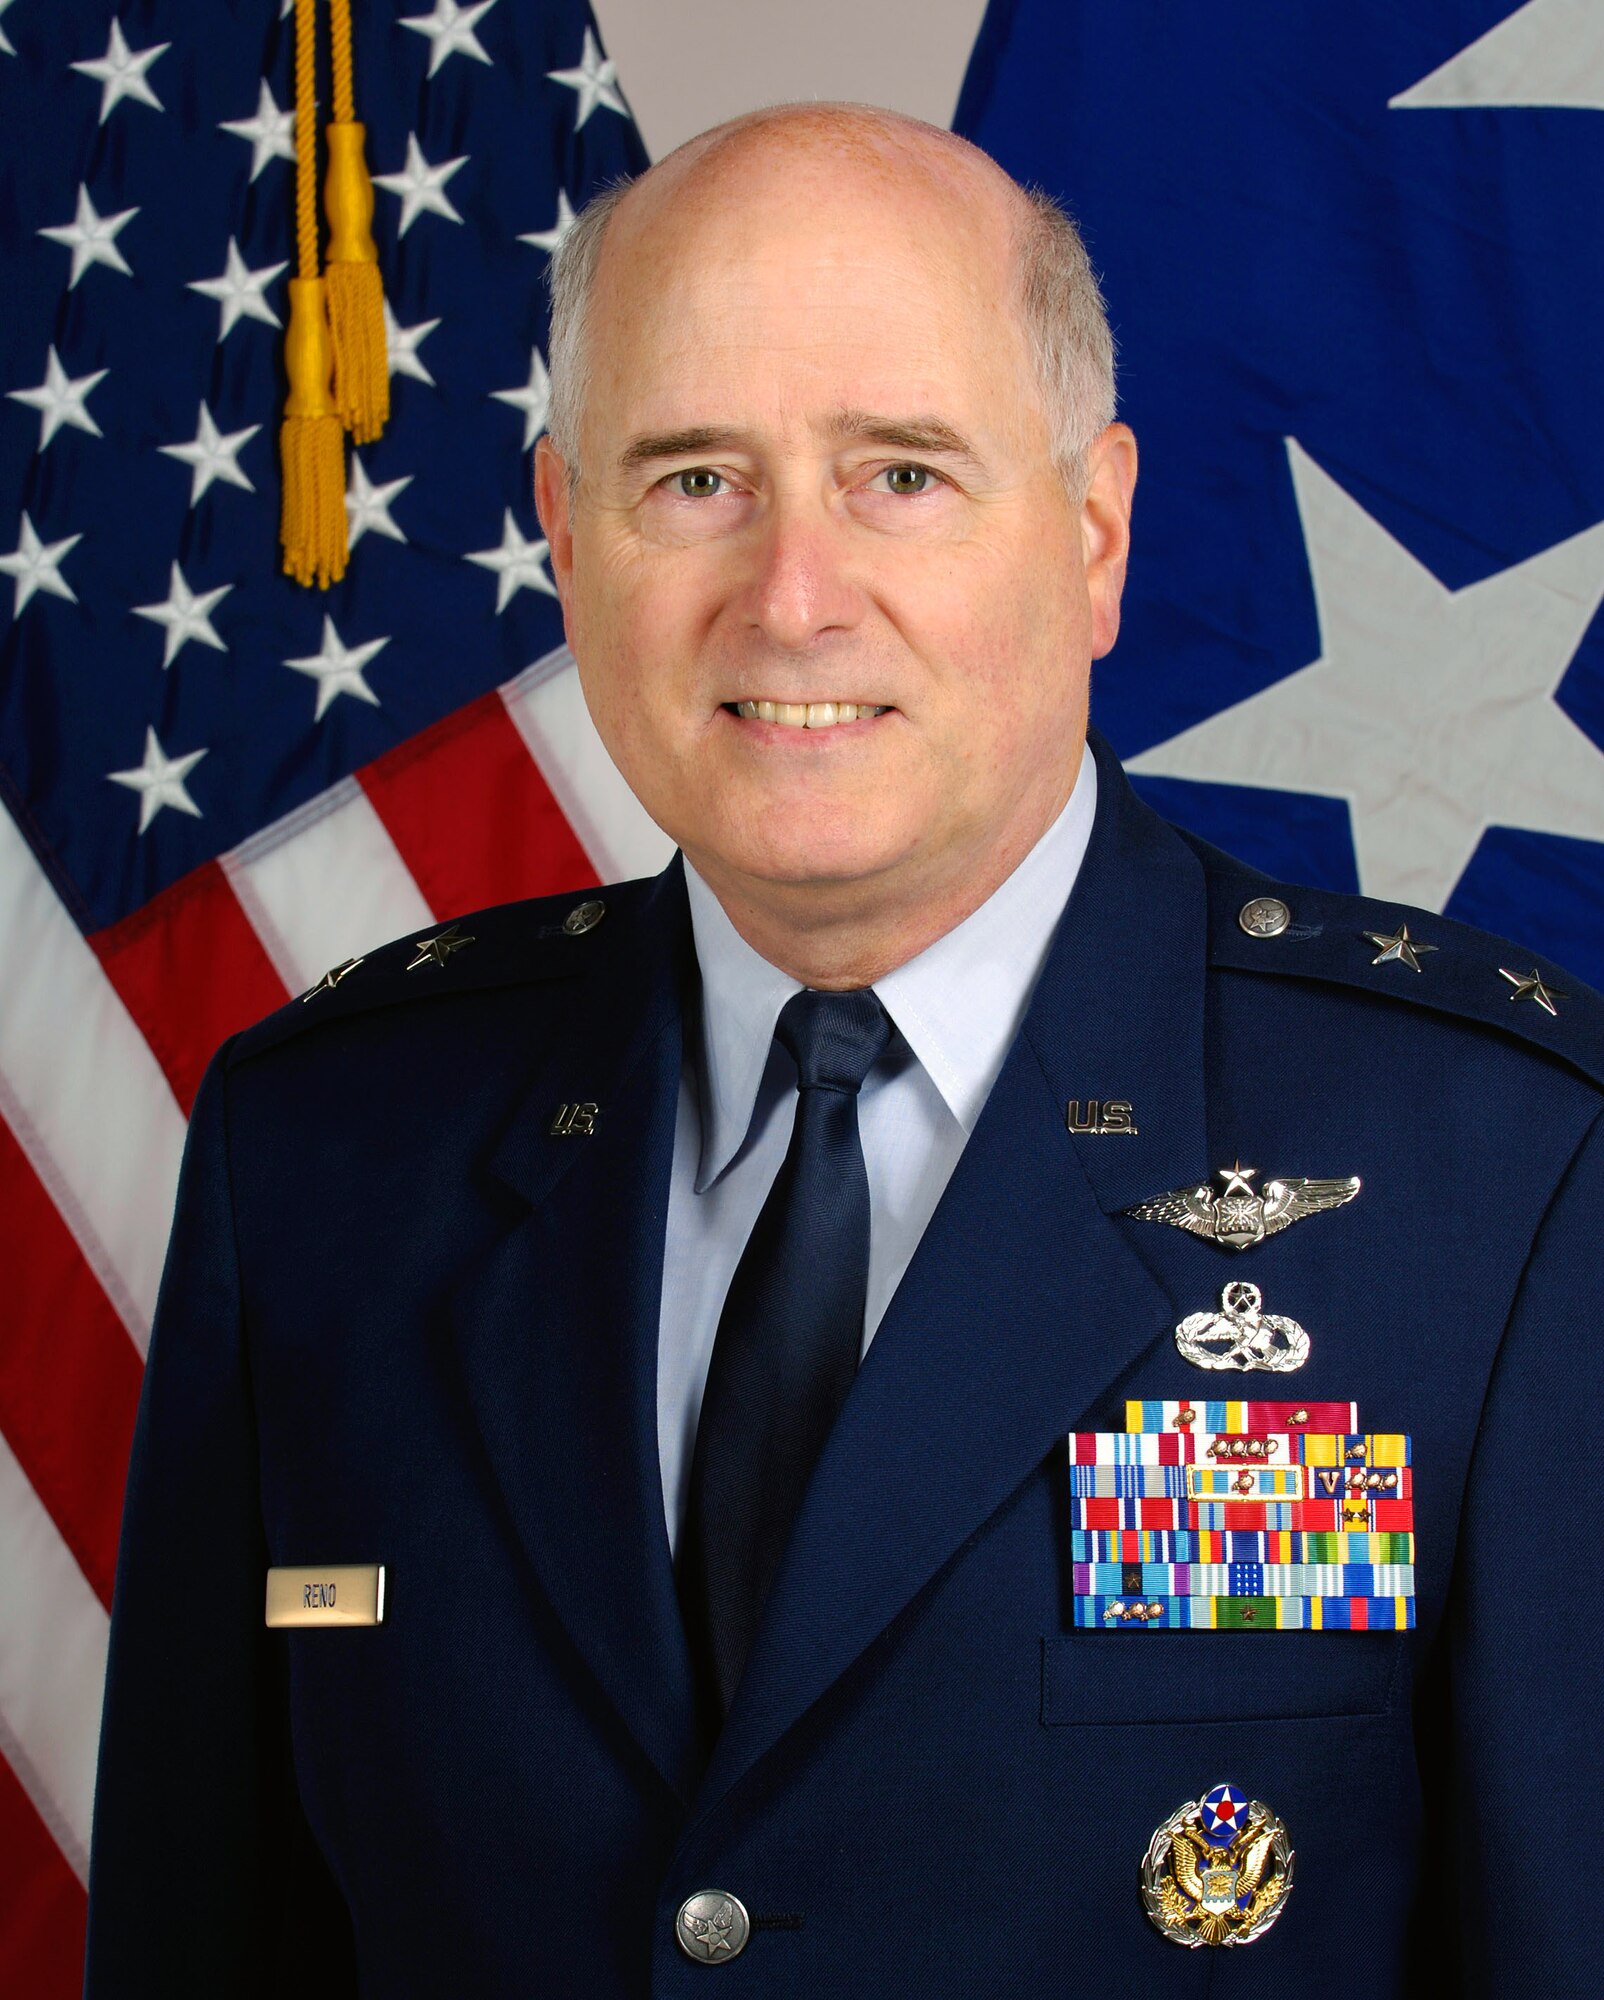 Maj. Gen. Loren M. Reno has been confirmed by the Senate for appointment to the grade of lieutenant general with assignment as deputy chief of staff, Logistics, Installations and Mission Support, Headquarters U.S. Air Force, Pentagon, Washington, D.C. General Reno is currently serving as commander, Oklahoma City Air Logistics Center, here. General Reno was promoted to major general in December 2004 and took command of the ALC in May 2007.